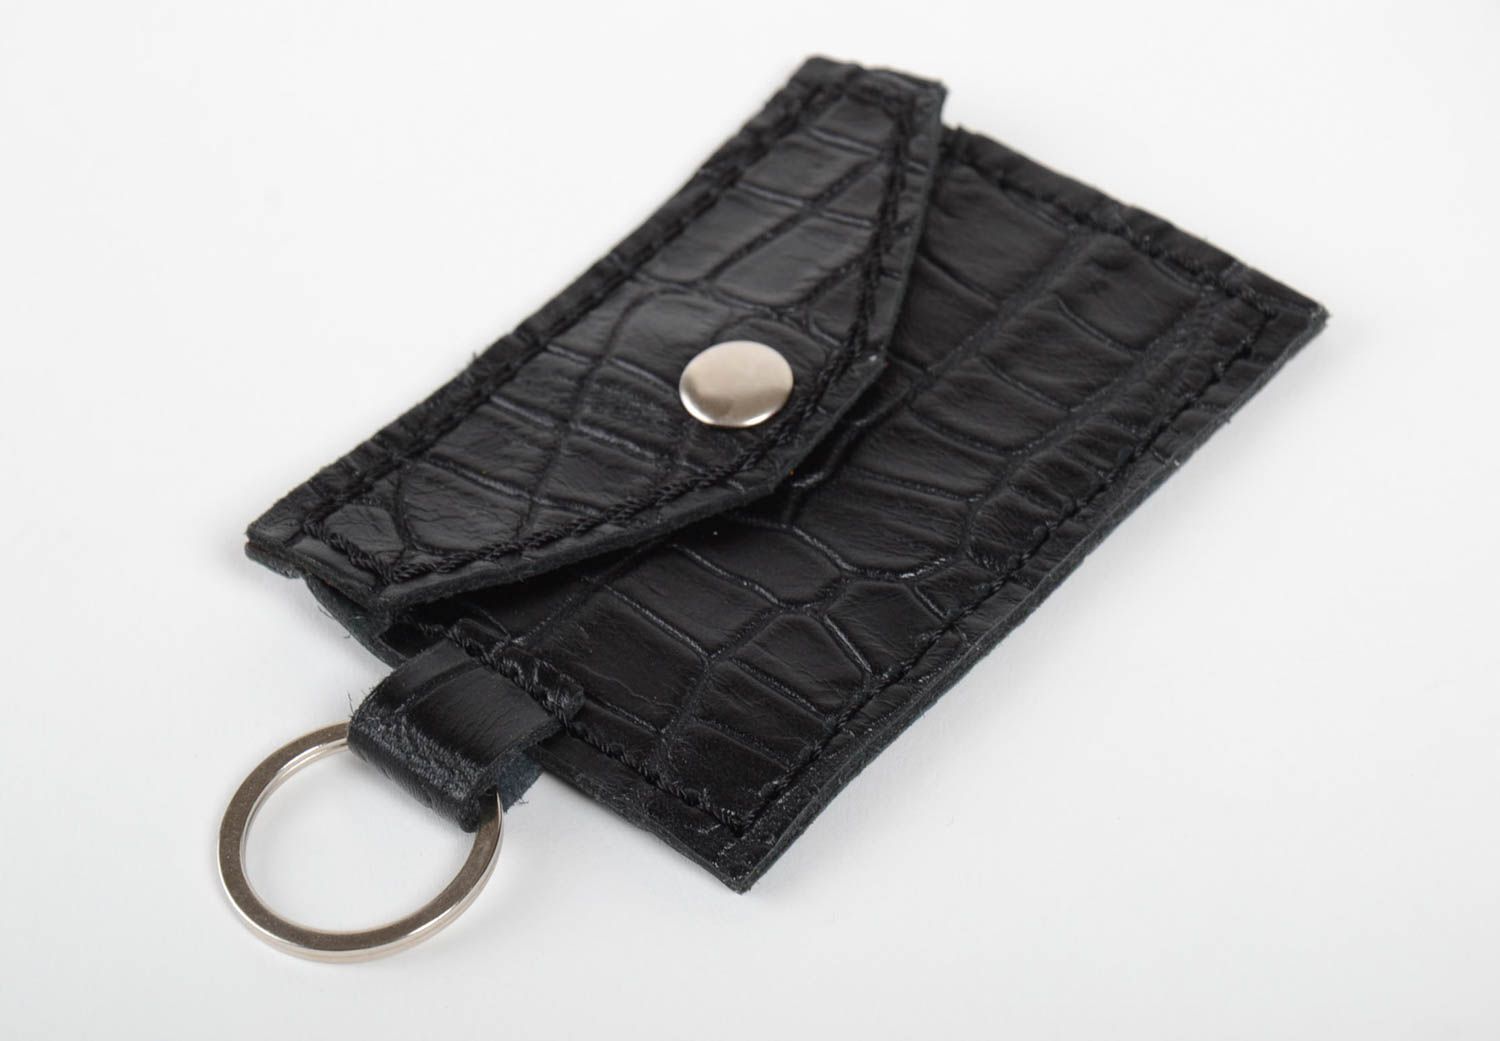 Handmade leather wallet keychain wallet leather goods mens accessories  photo 2